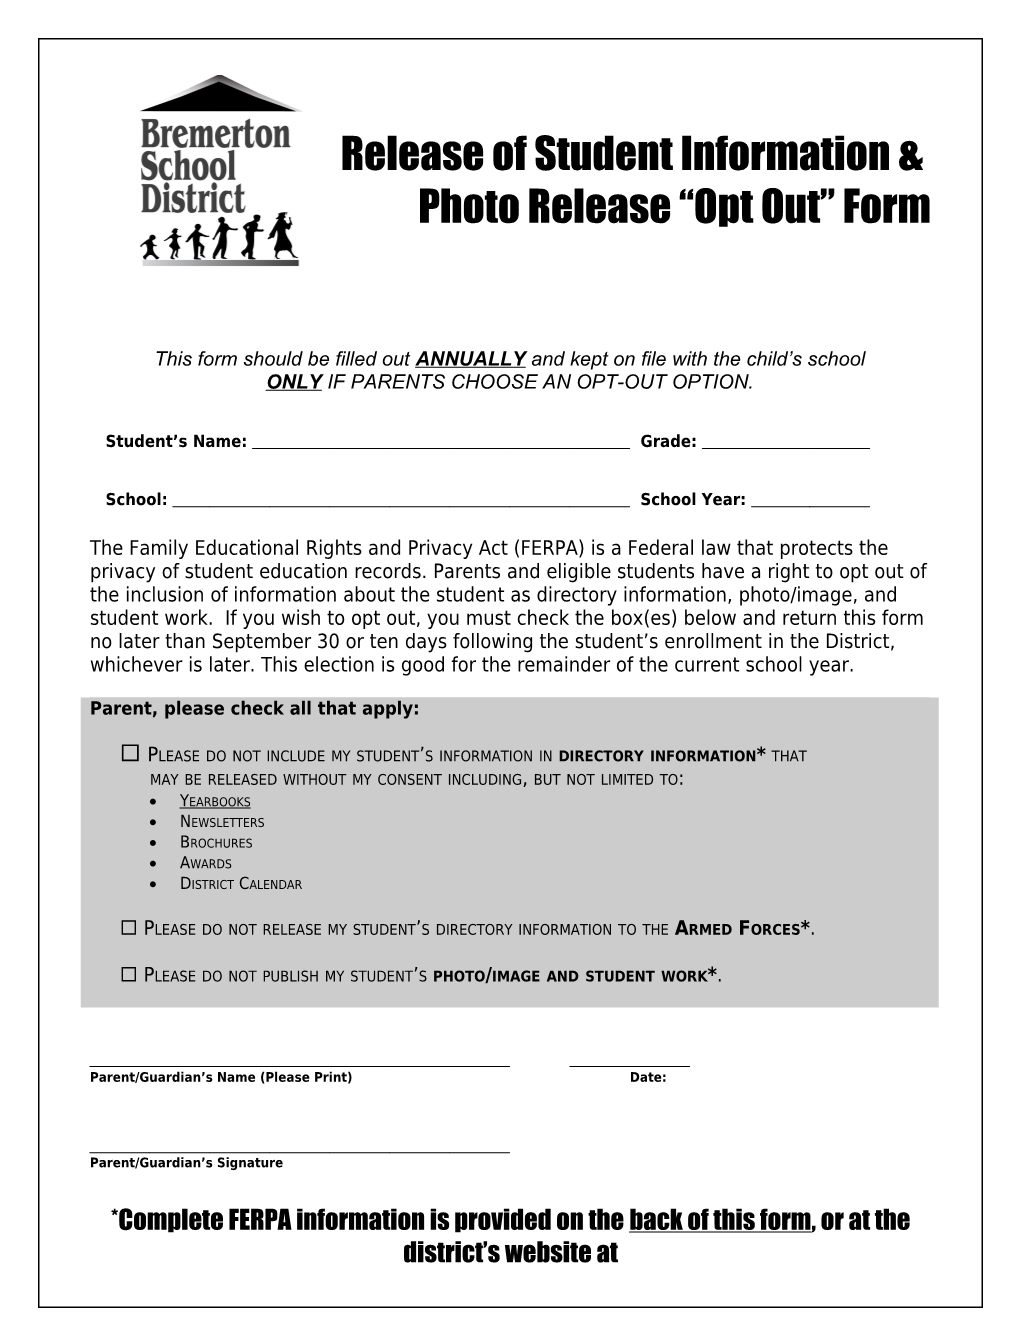 Release of Student Information & Photo Release